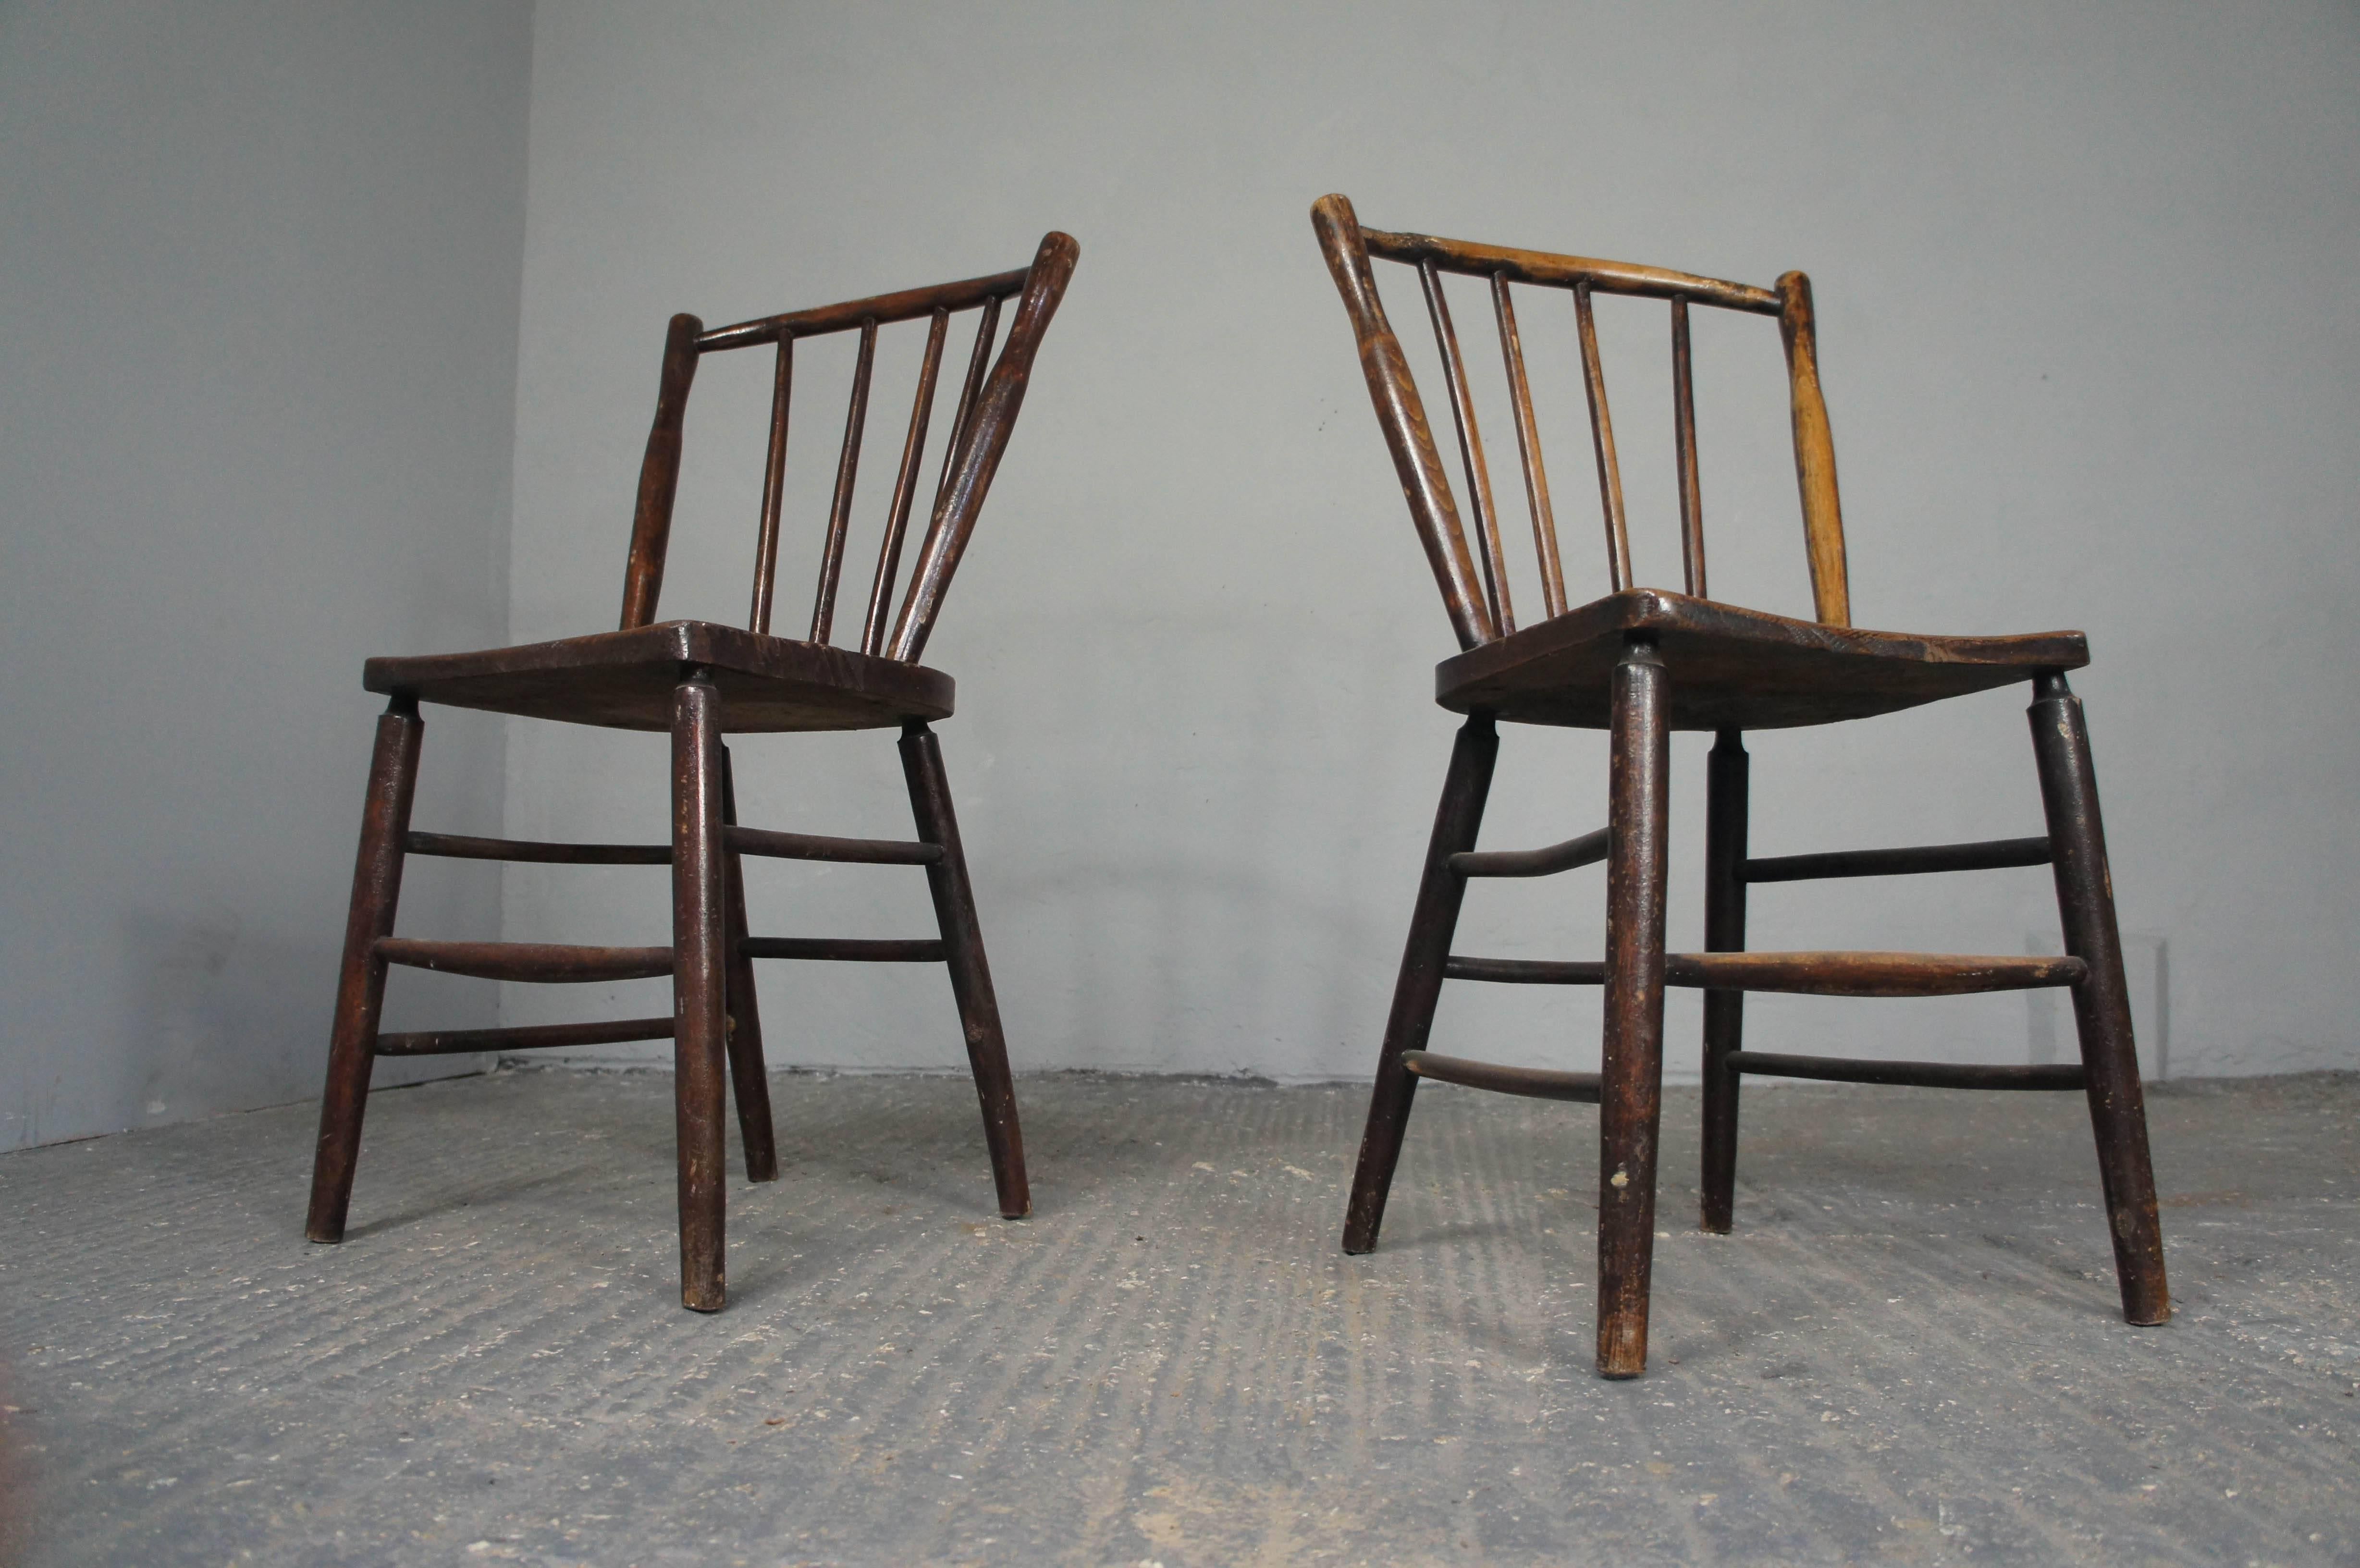 A pair of early Irish spindle back beech kitchen chairs with ash seat. Both chairs are stamped on the back of the seat. Simple, rustic design.